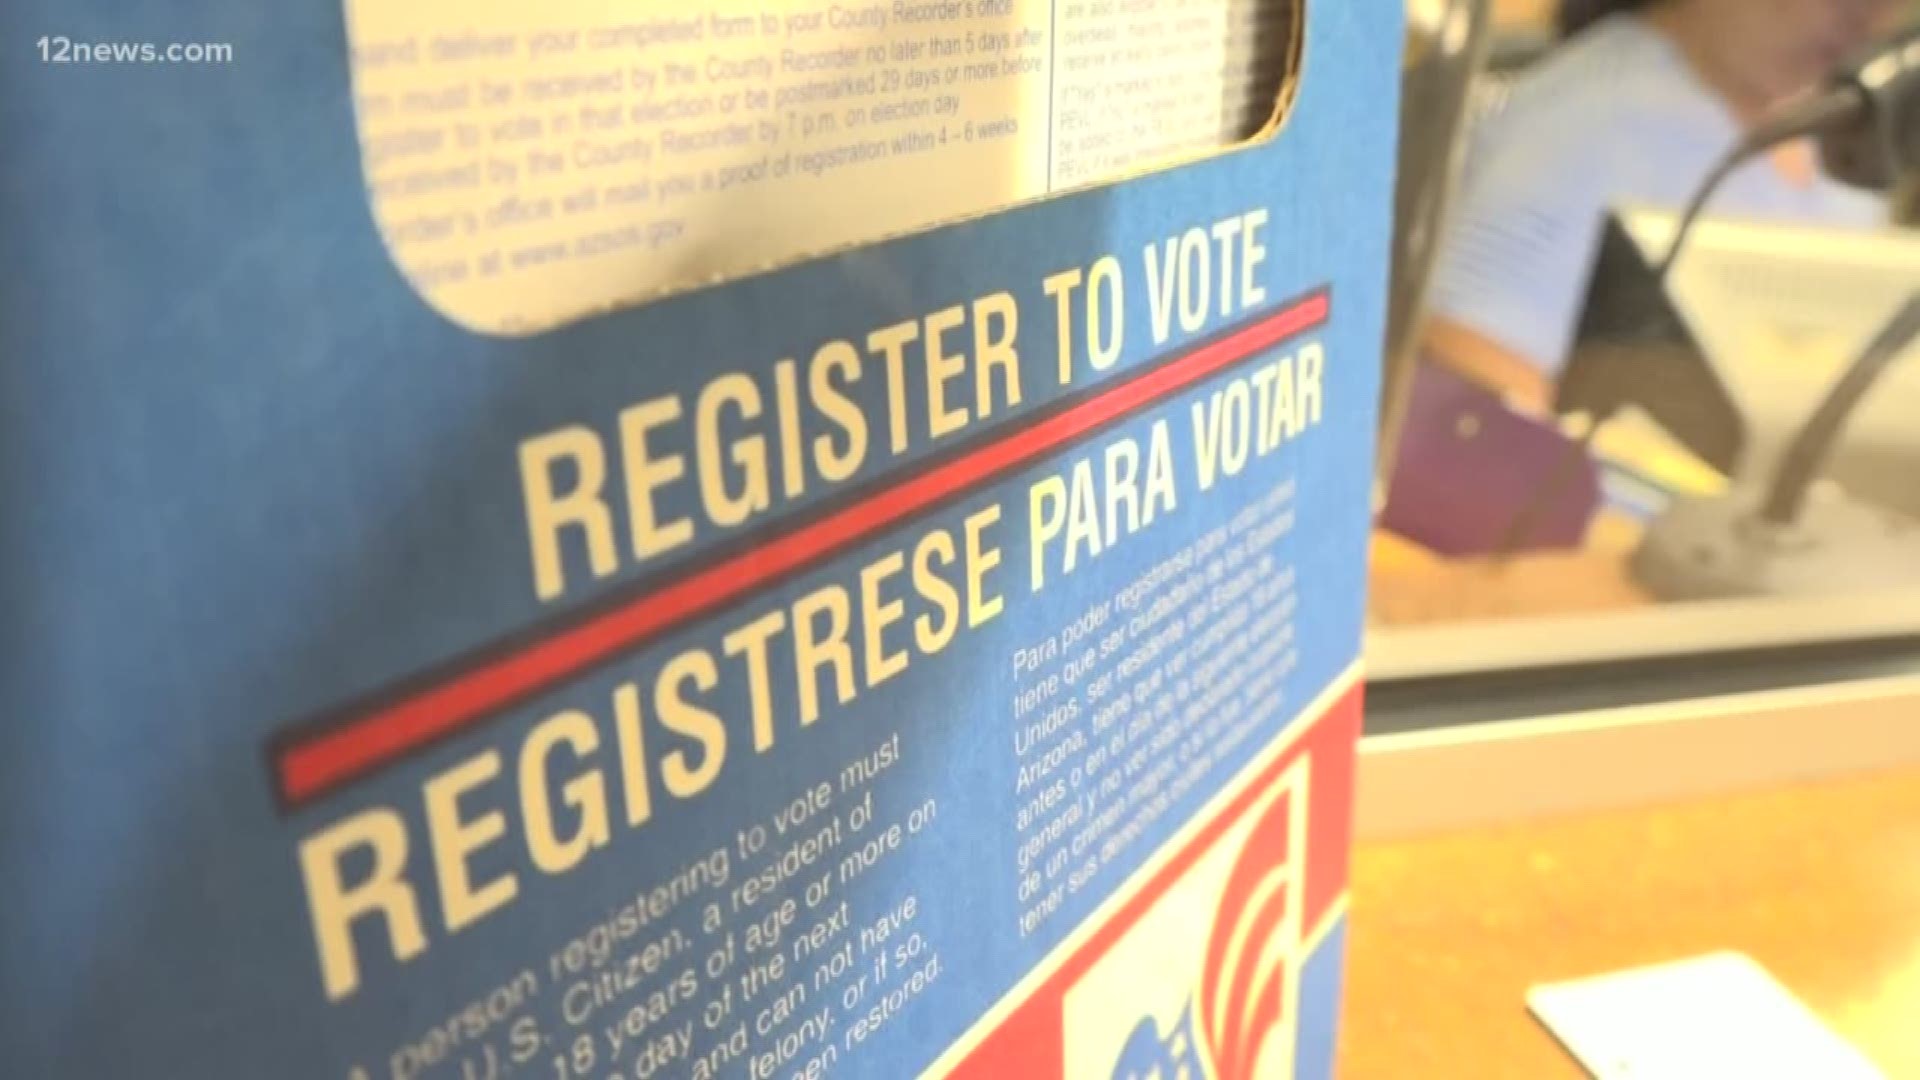 A spokeswoman for the Maricopa County Recorder's Office says 45,000 voter registration forms were received by the office Monday and Tuesday. The mid-term elections November 6.